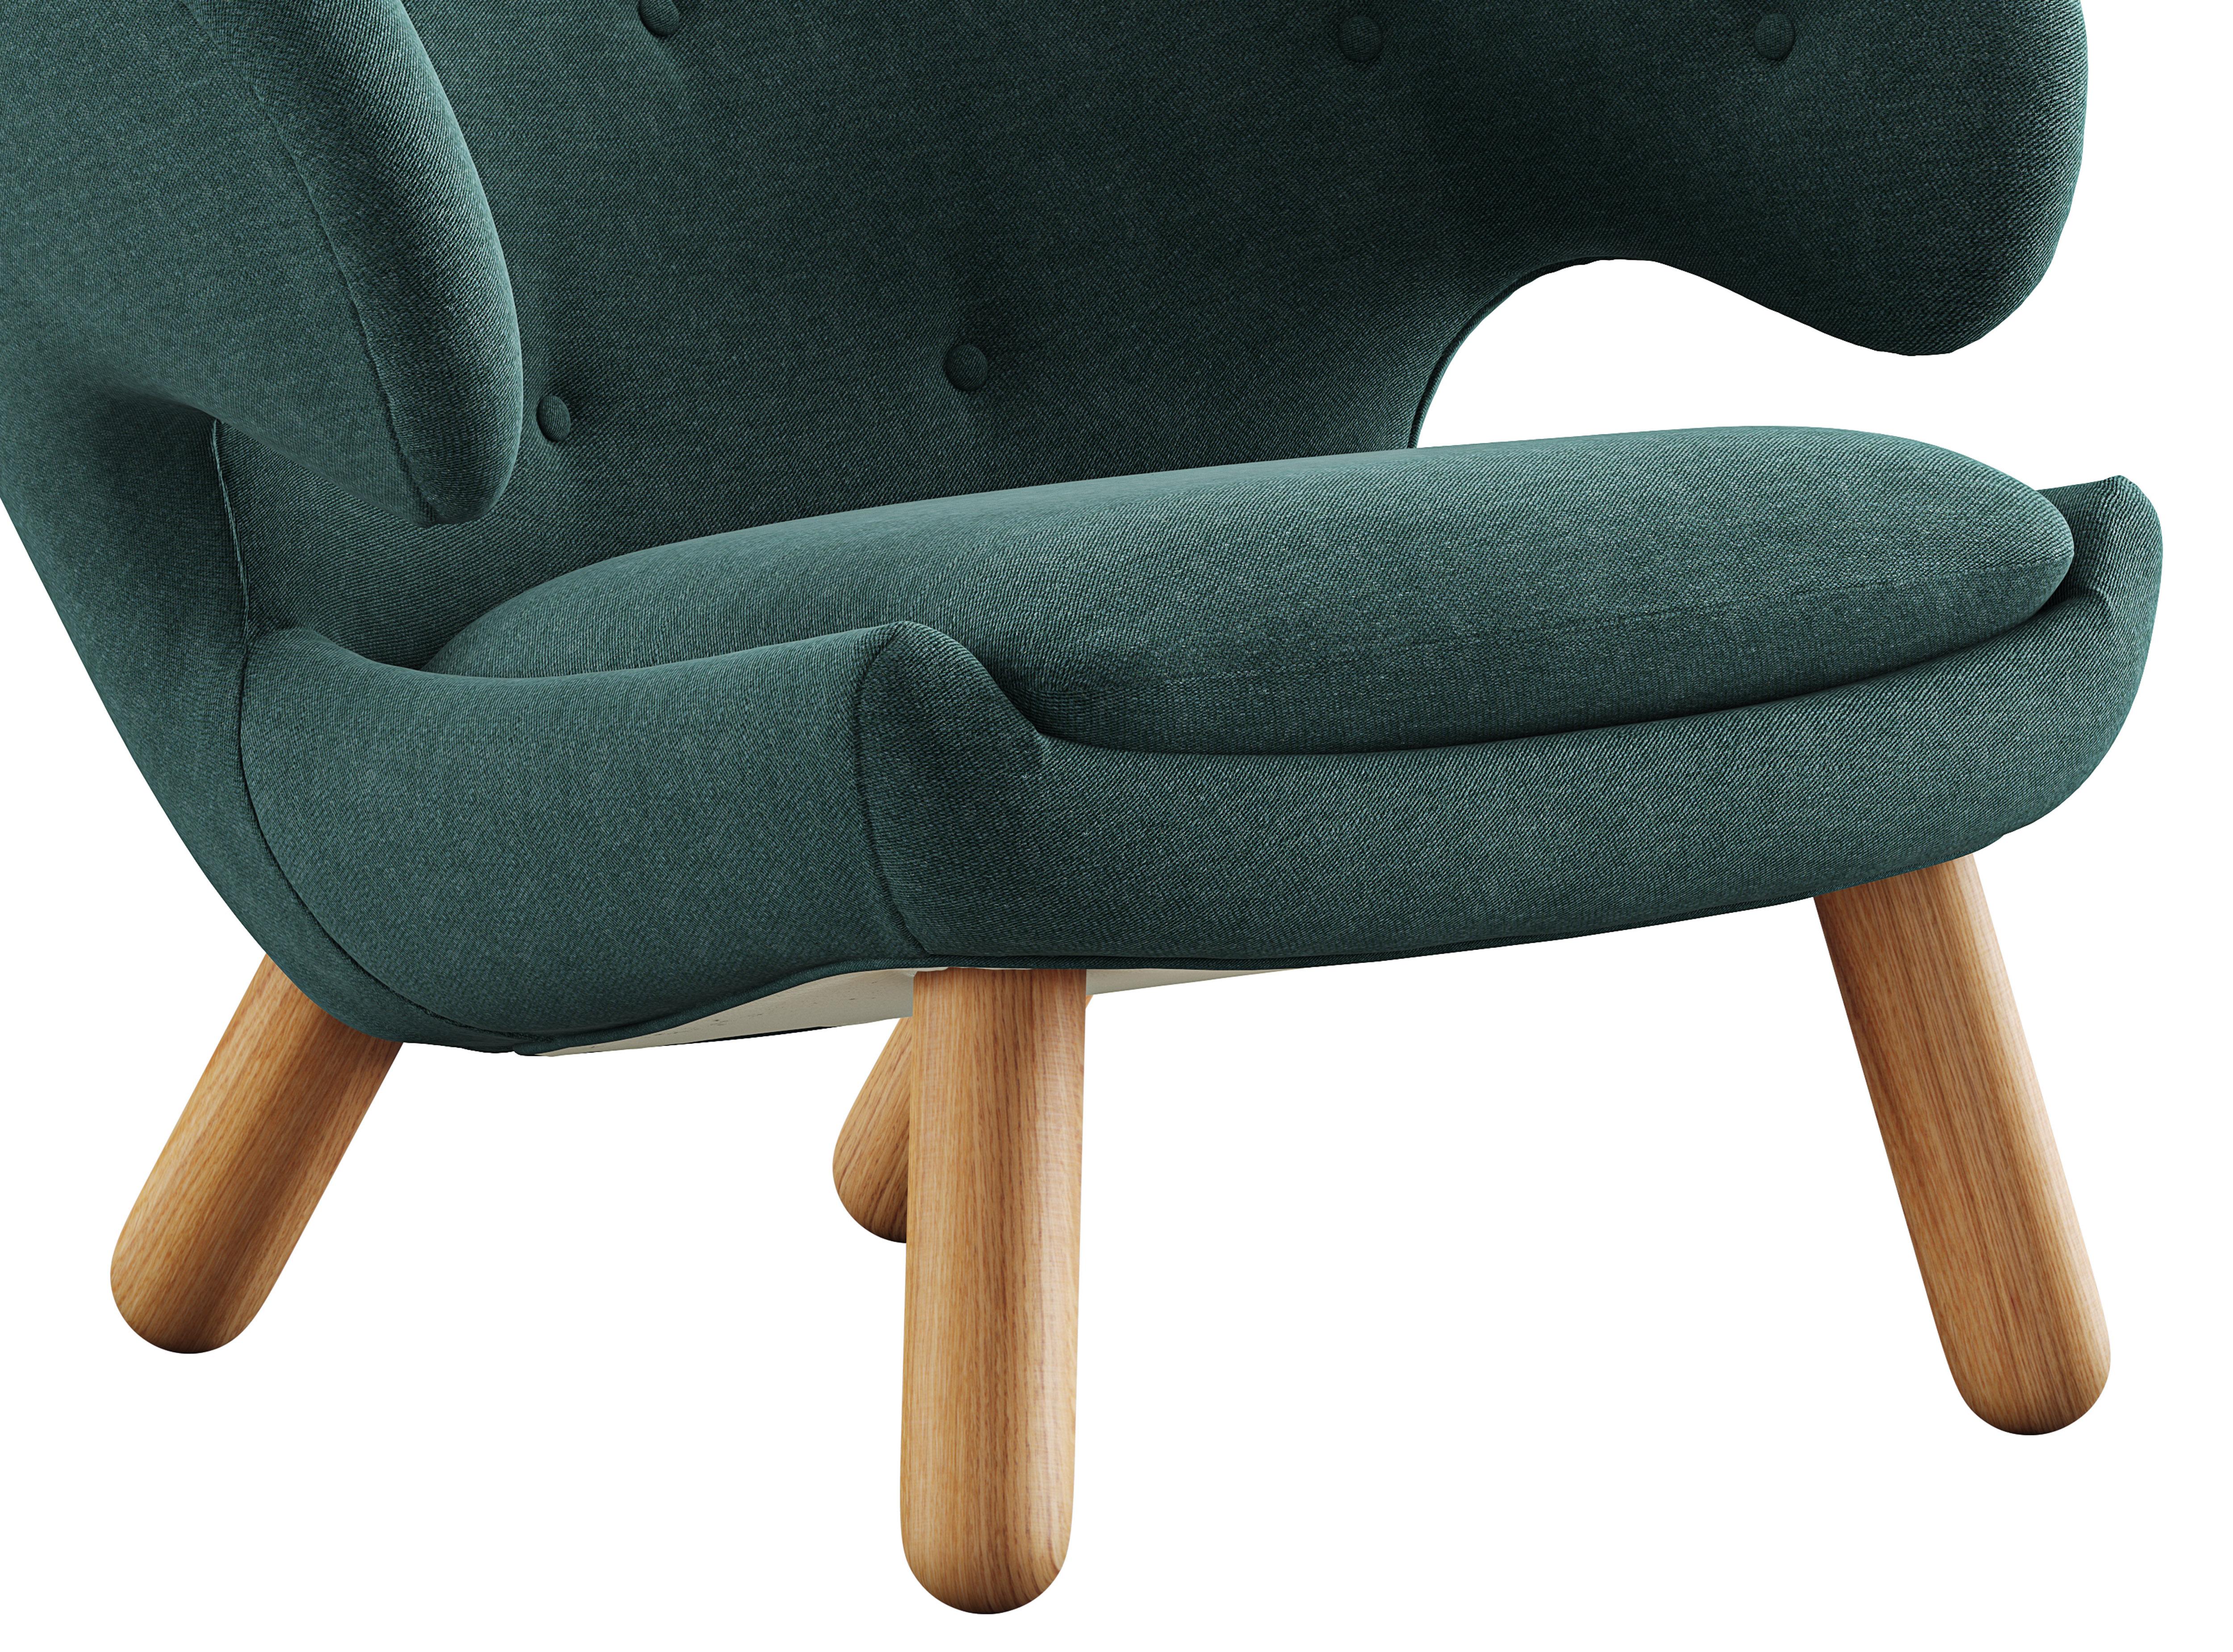 Contemporary Set of Two Finn Juhl Pelican Chairs Upholstered in Wood and Fabric